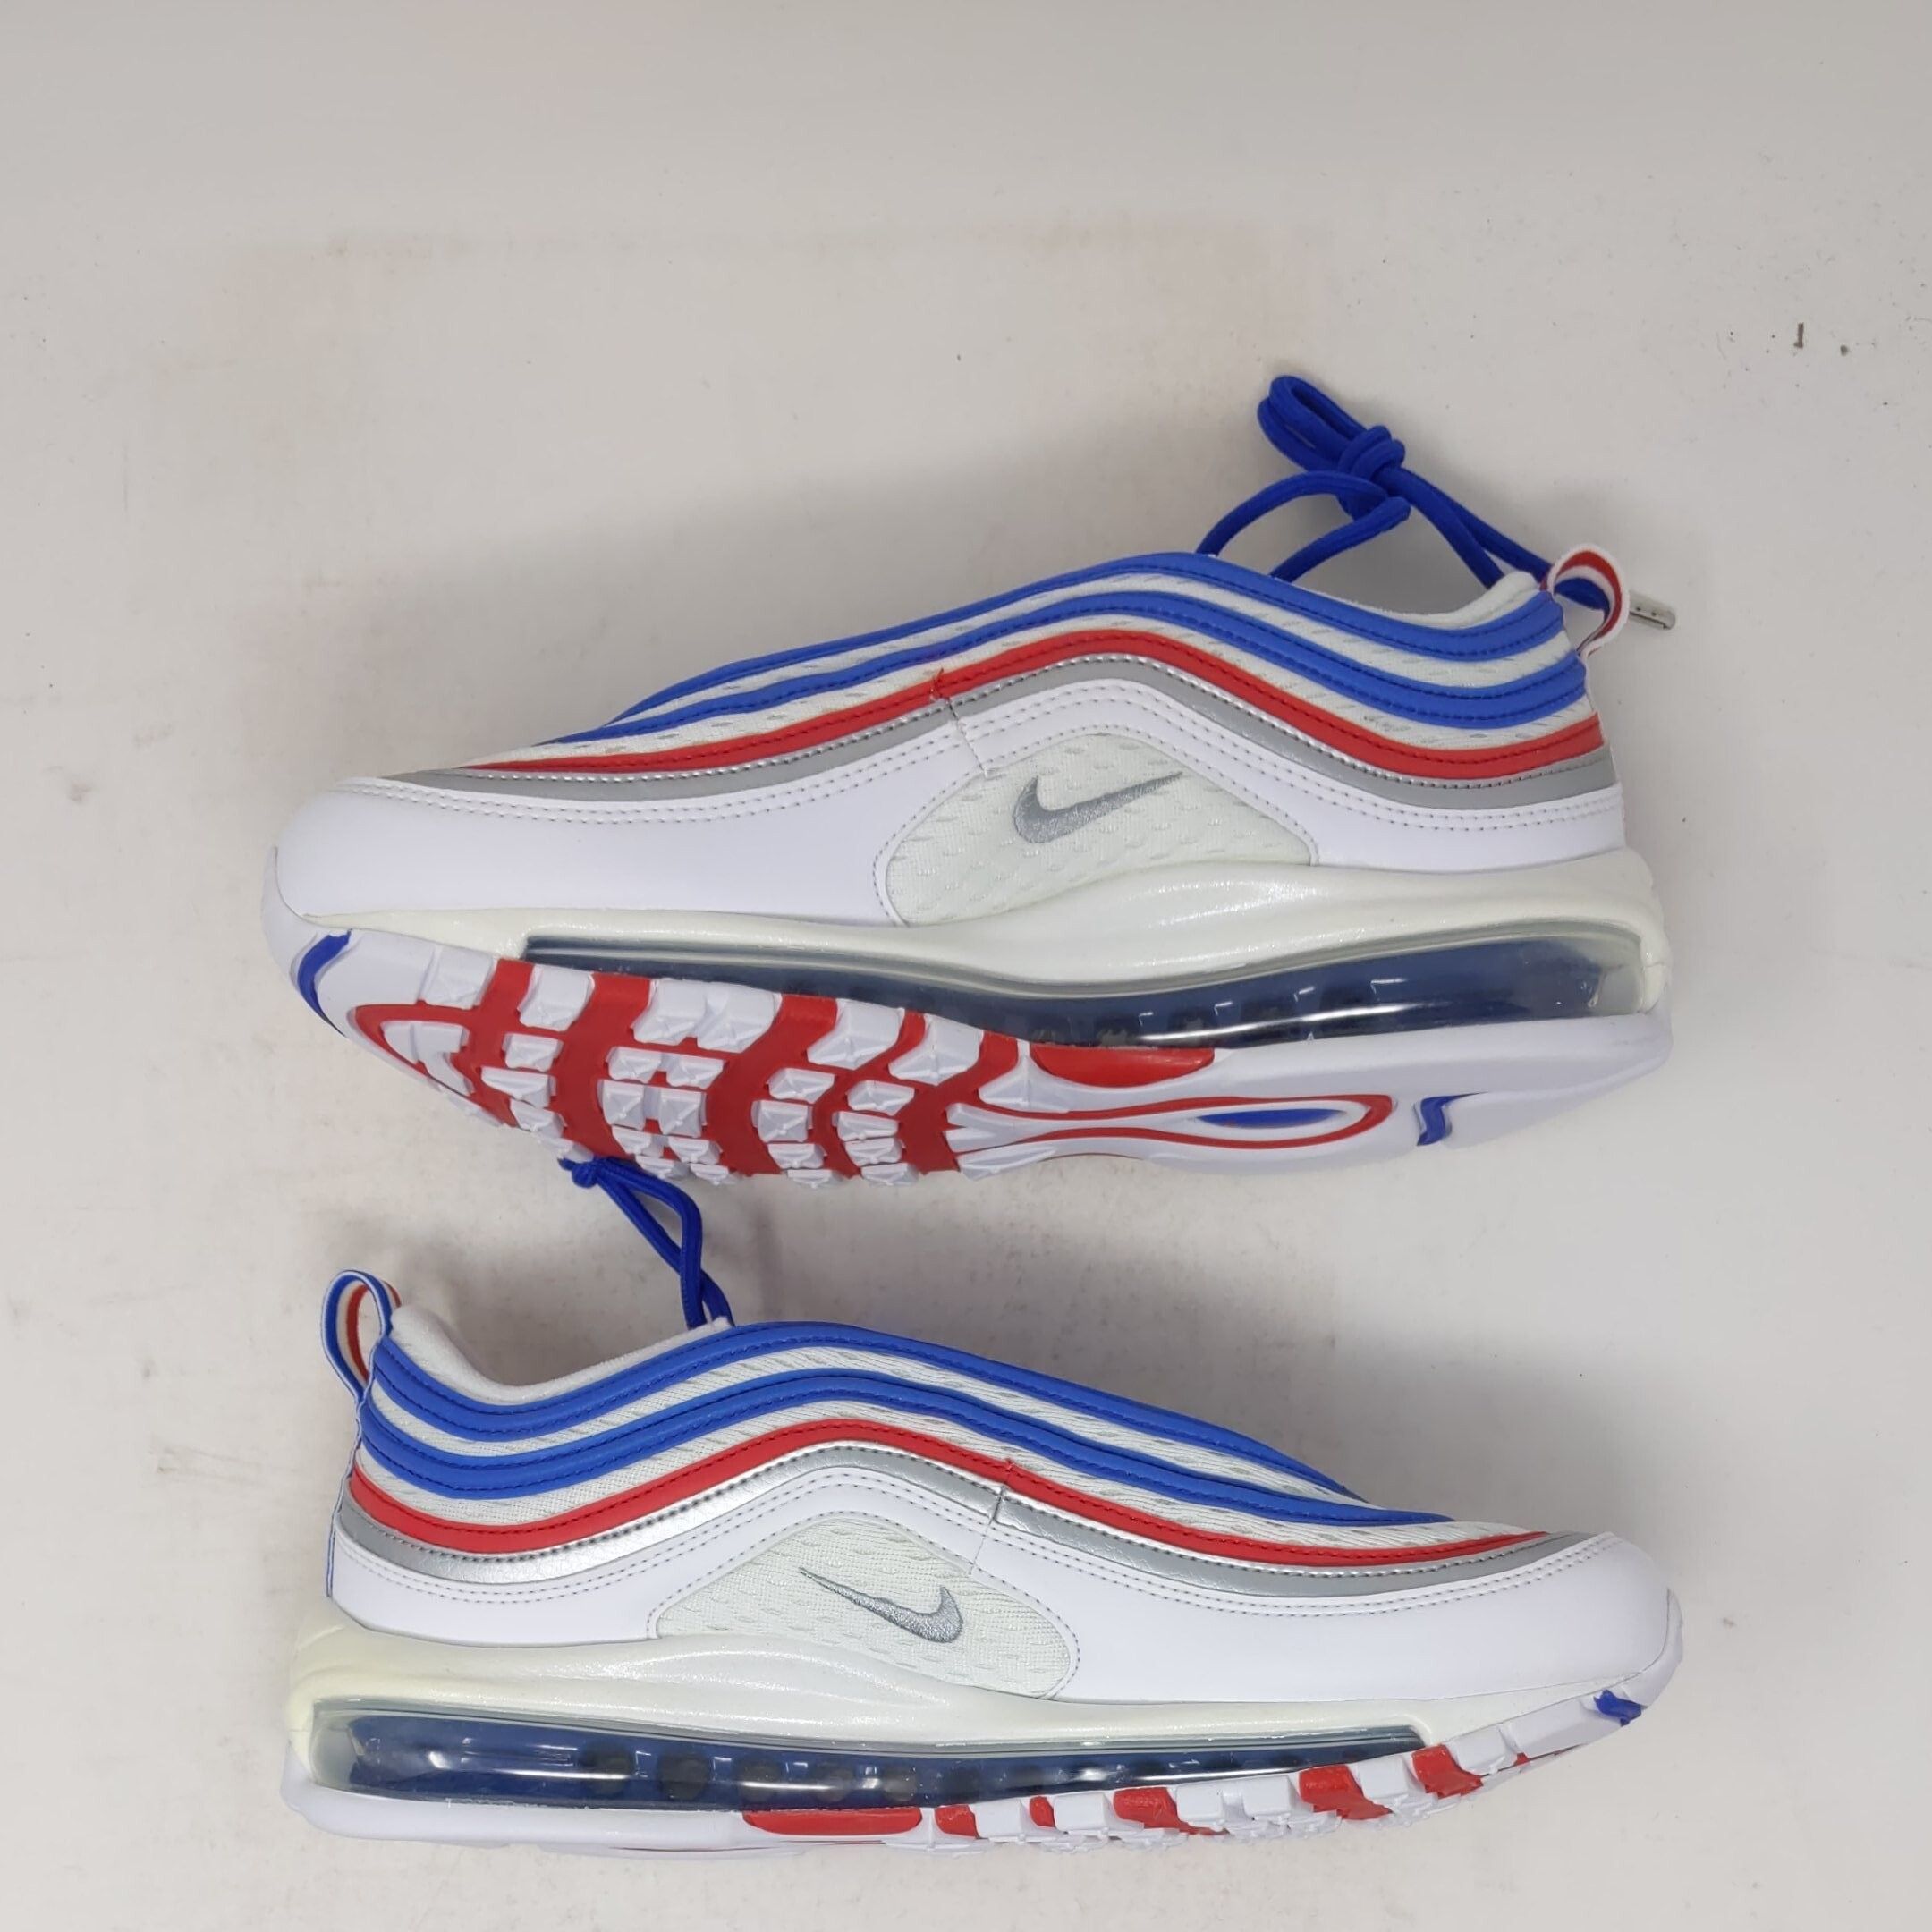 Nike Air Max 97 All Star Jersey Size US 8 / EU 41 - 2 Preview